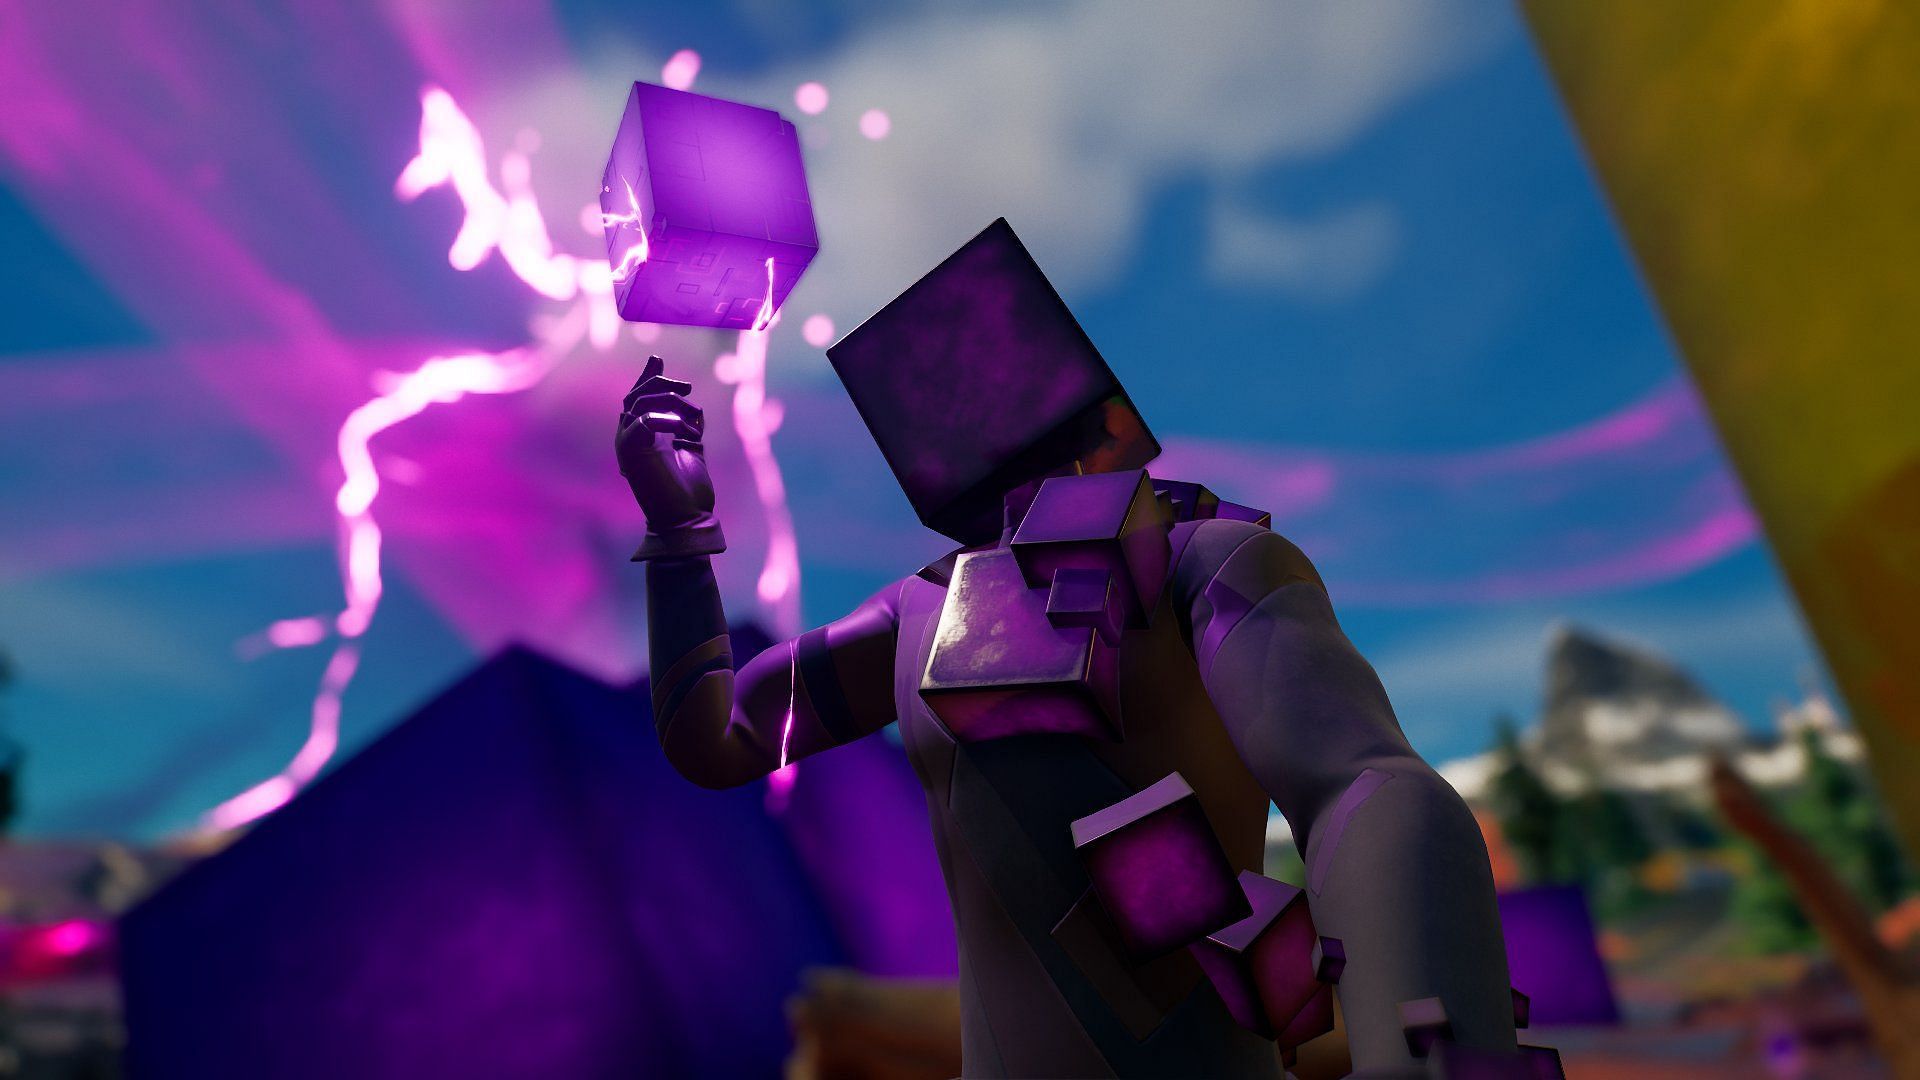 Kevin The Cube may be coming back to Fortnite in Chapter 4 Season 3 (Image via Twitter/Pancake_Punk)